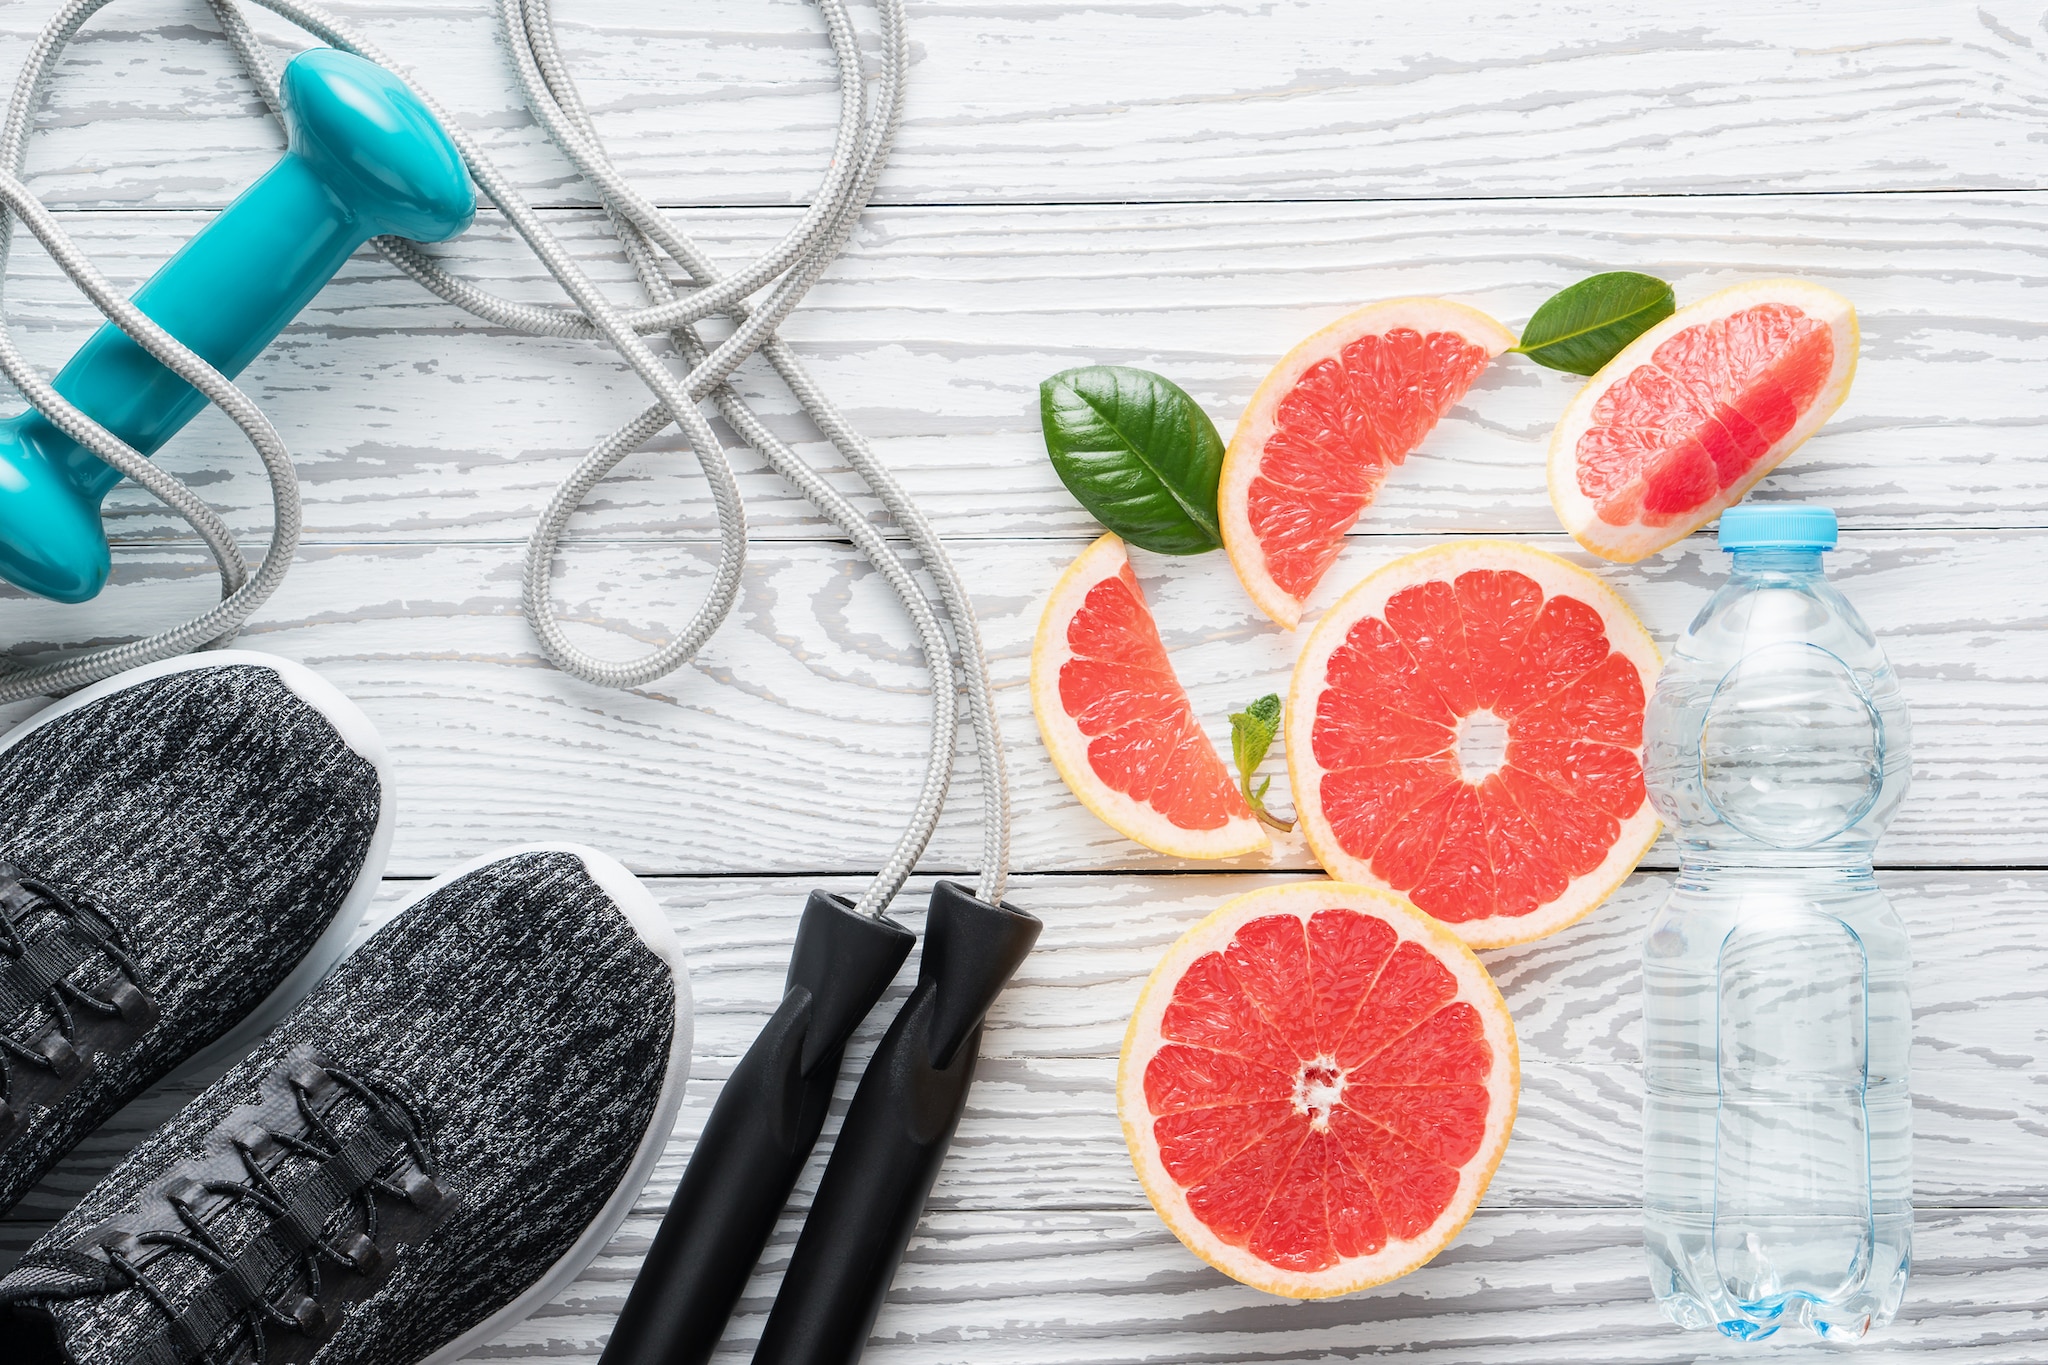 Sport shoes, rope, bottle of water and fresh grapefruits on rustic white wooden table, fitness accessories.